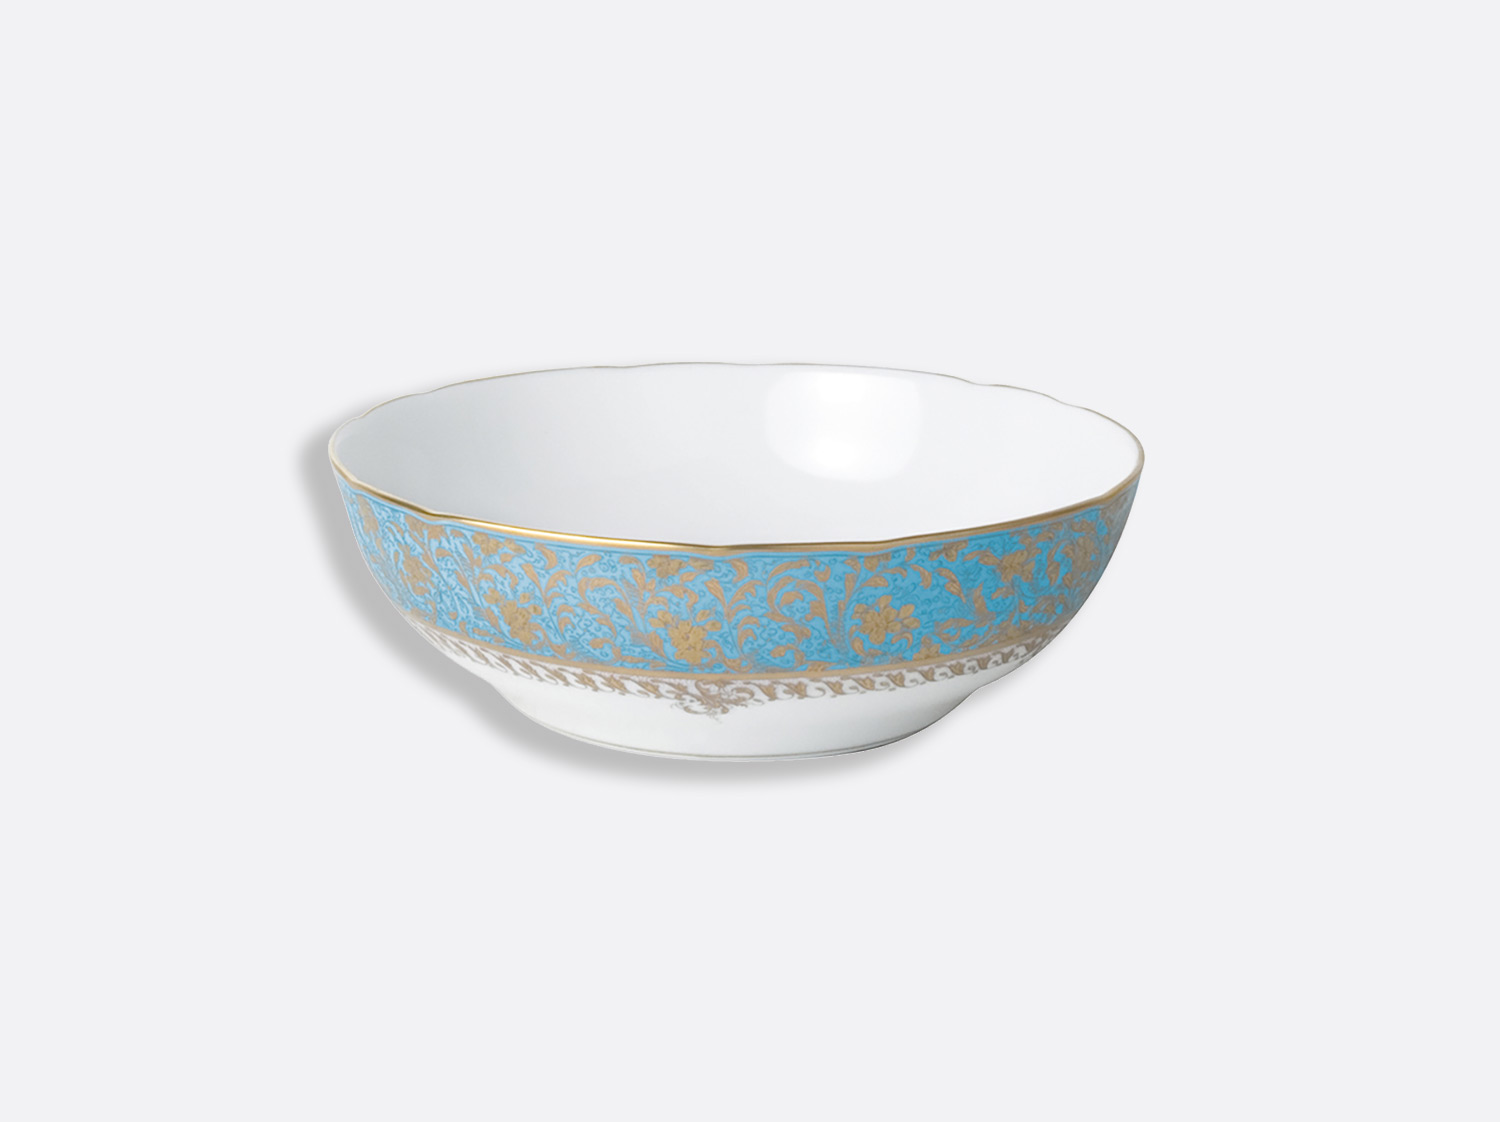 China Open vegetable bowl 9.6" 27 oz of the collection Eden turquoise | Bernardaud